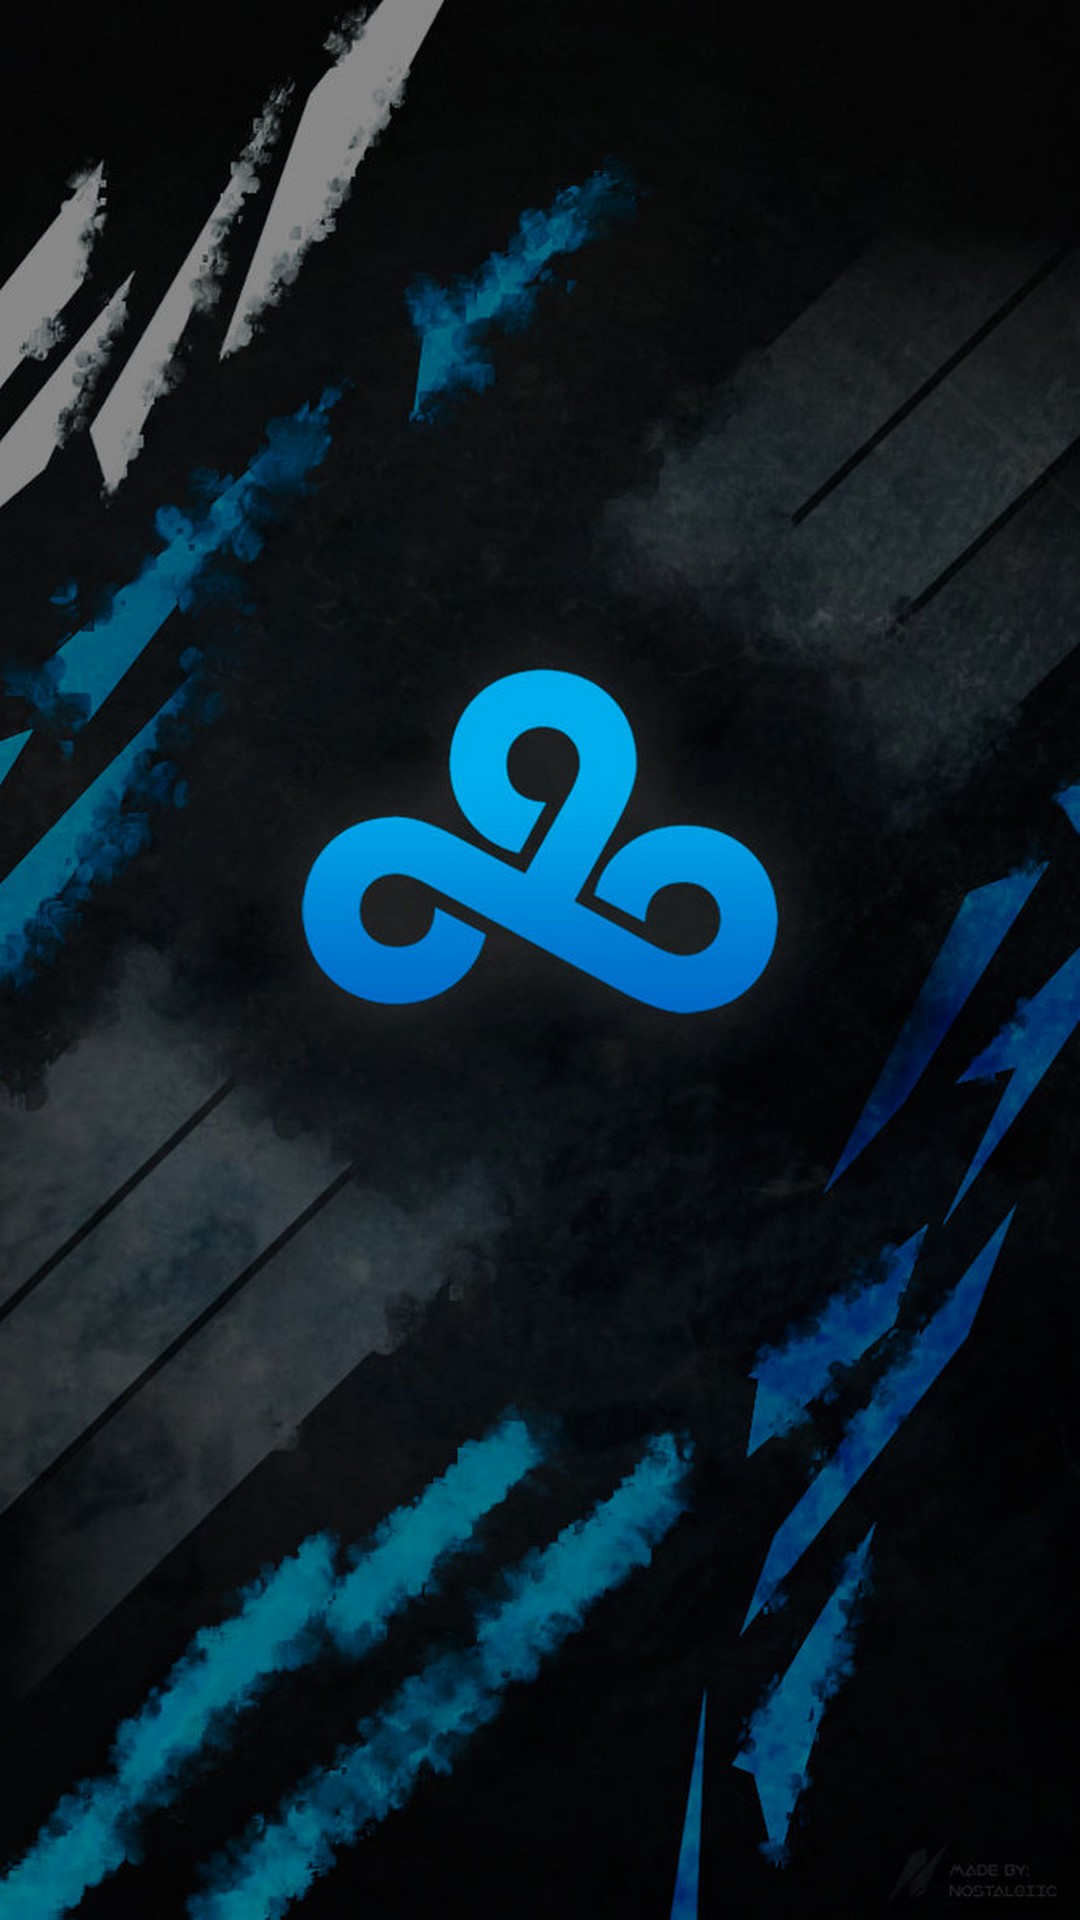 iPhone 8 Wallpaper Cloud 9 Games with HD Resolution 1080X1920